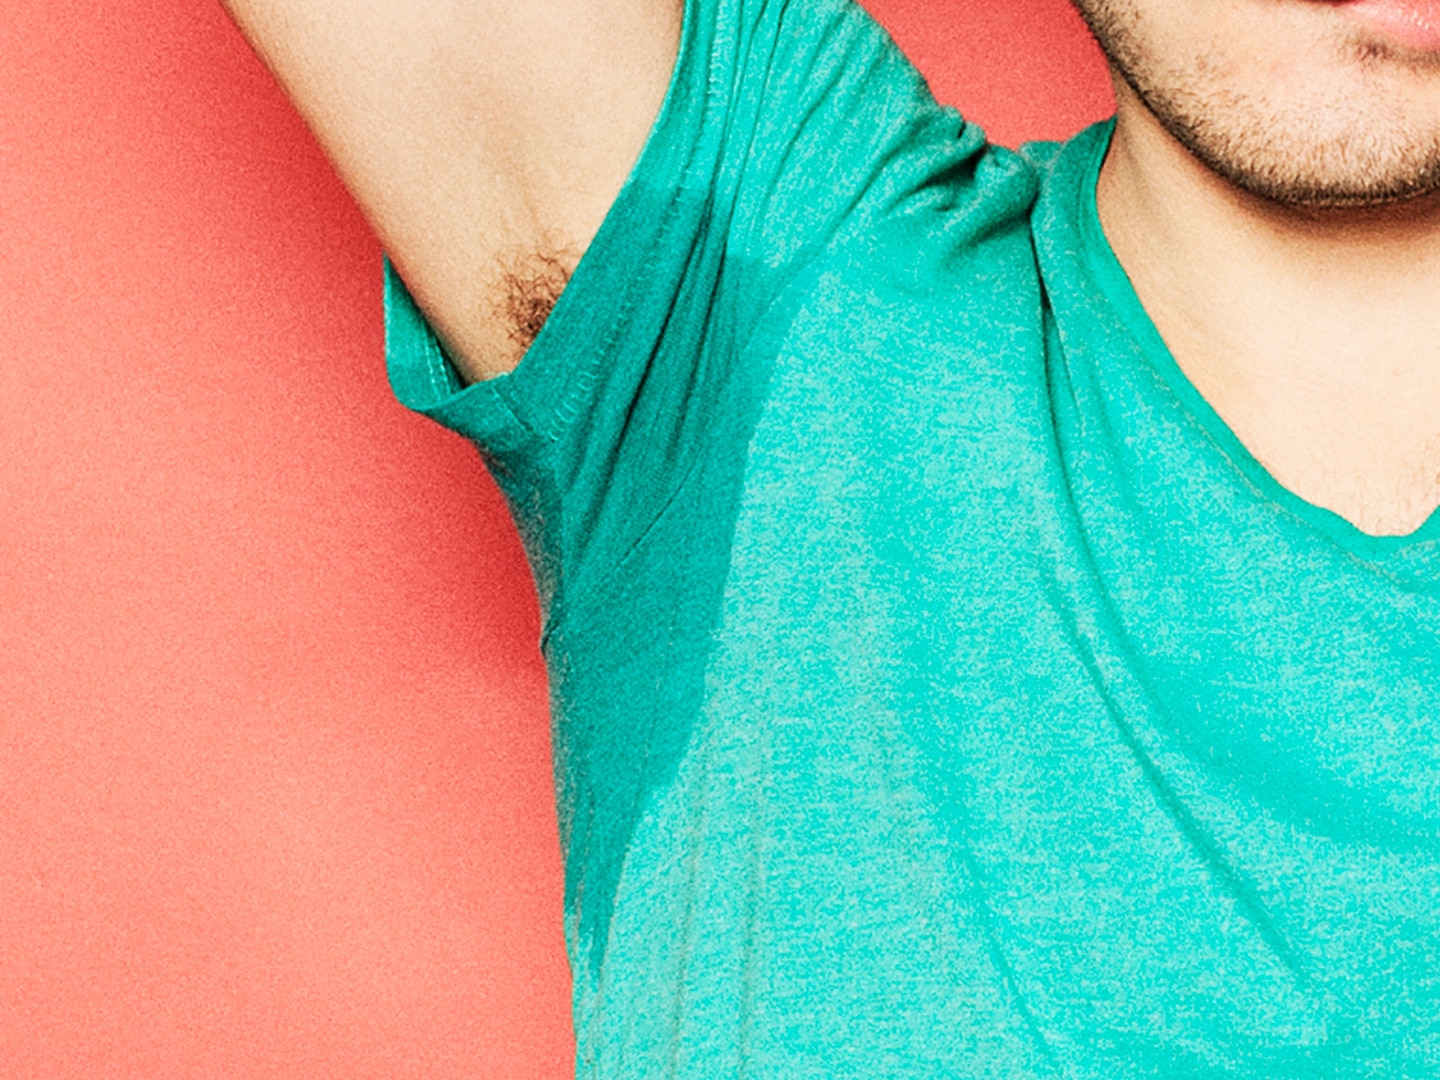 Guy holding up sweaty underarm in teal tshirt